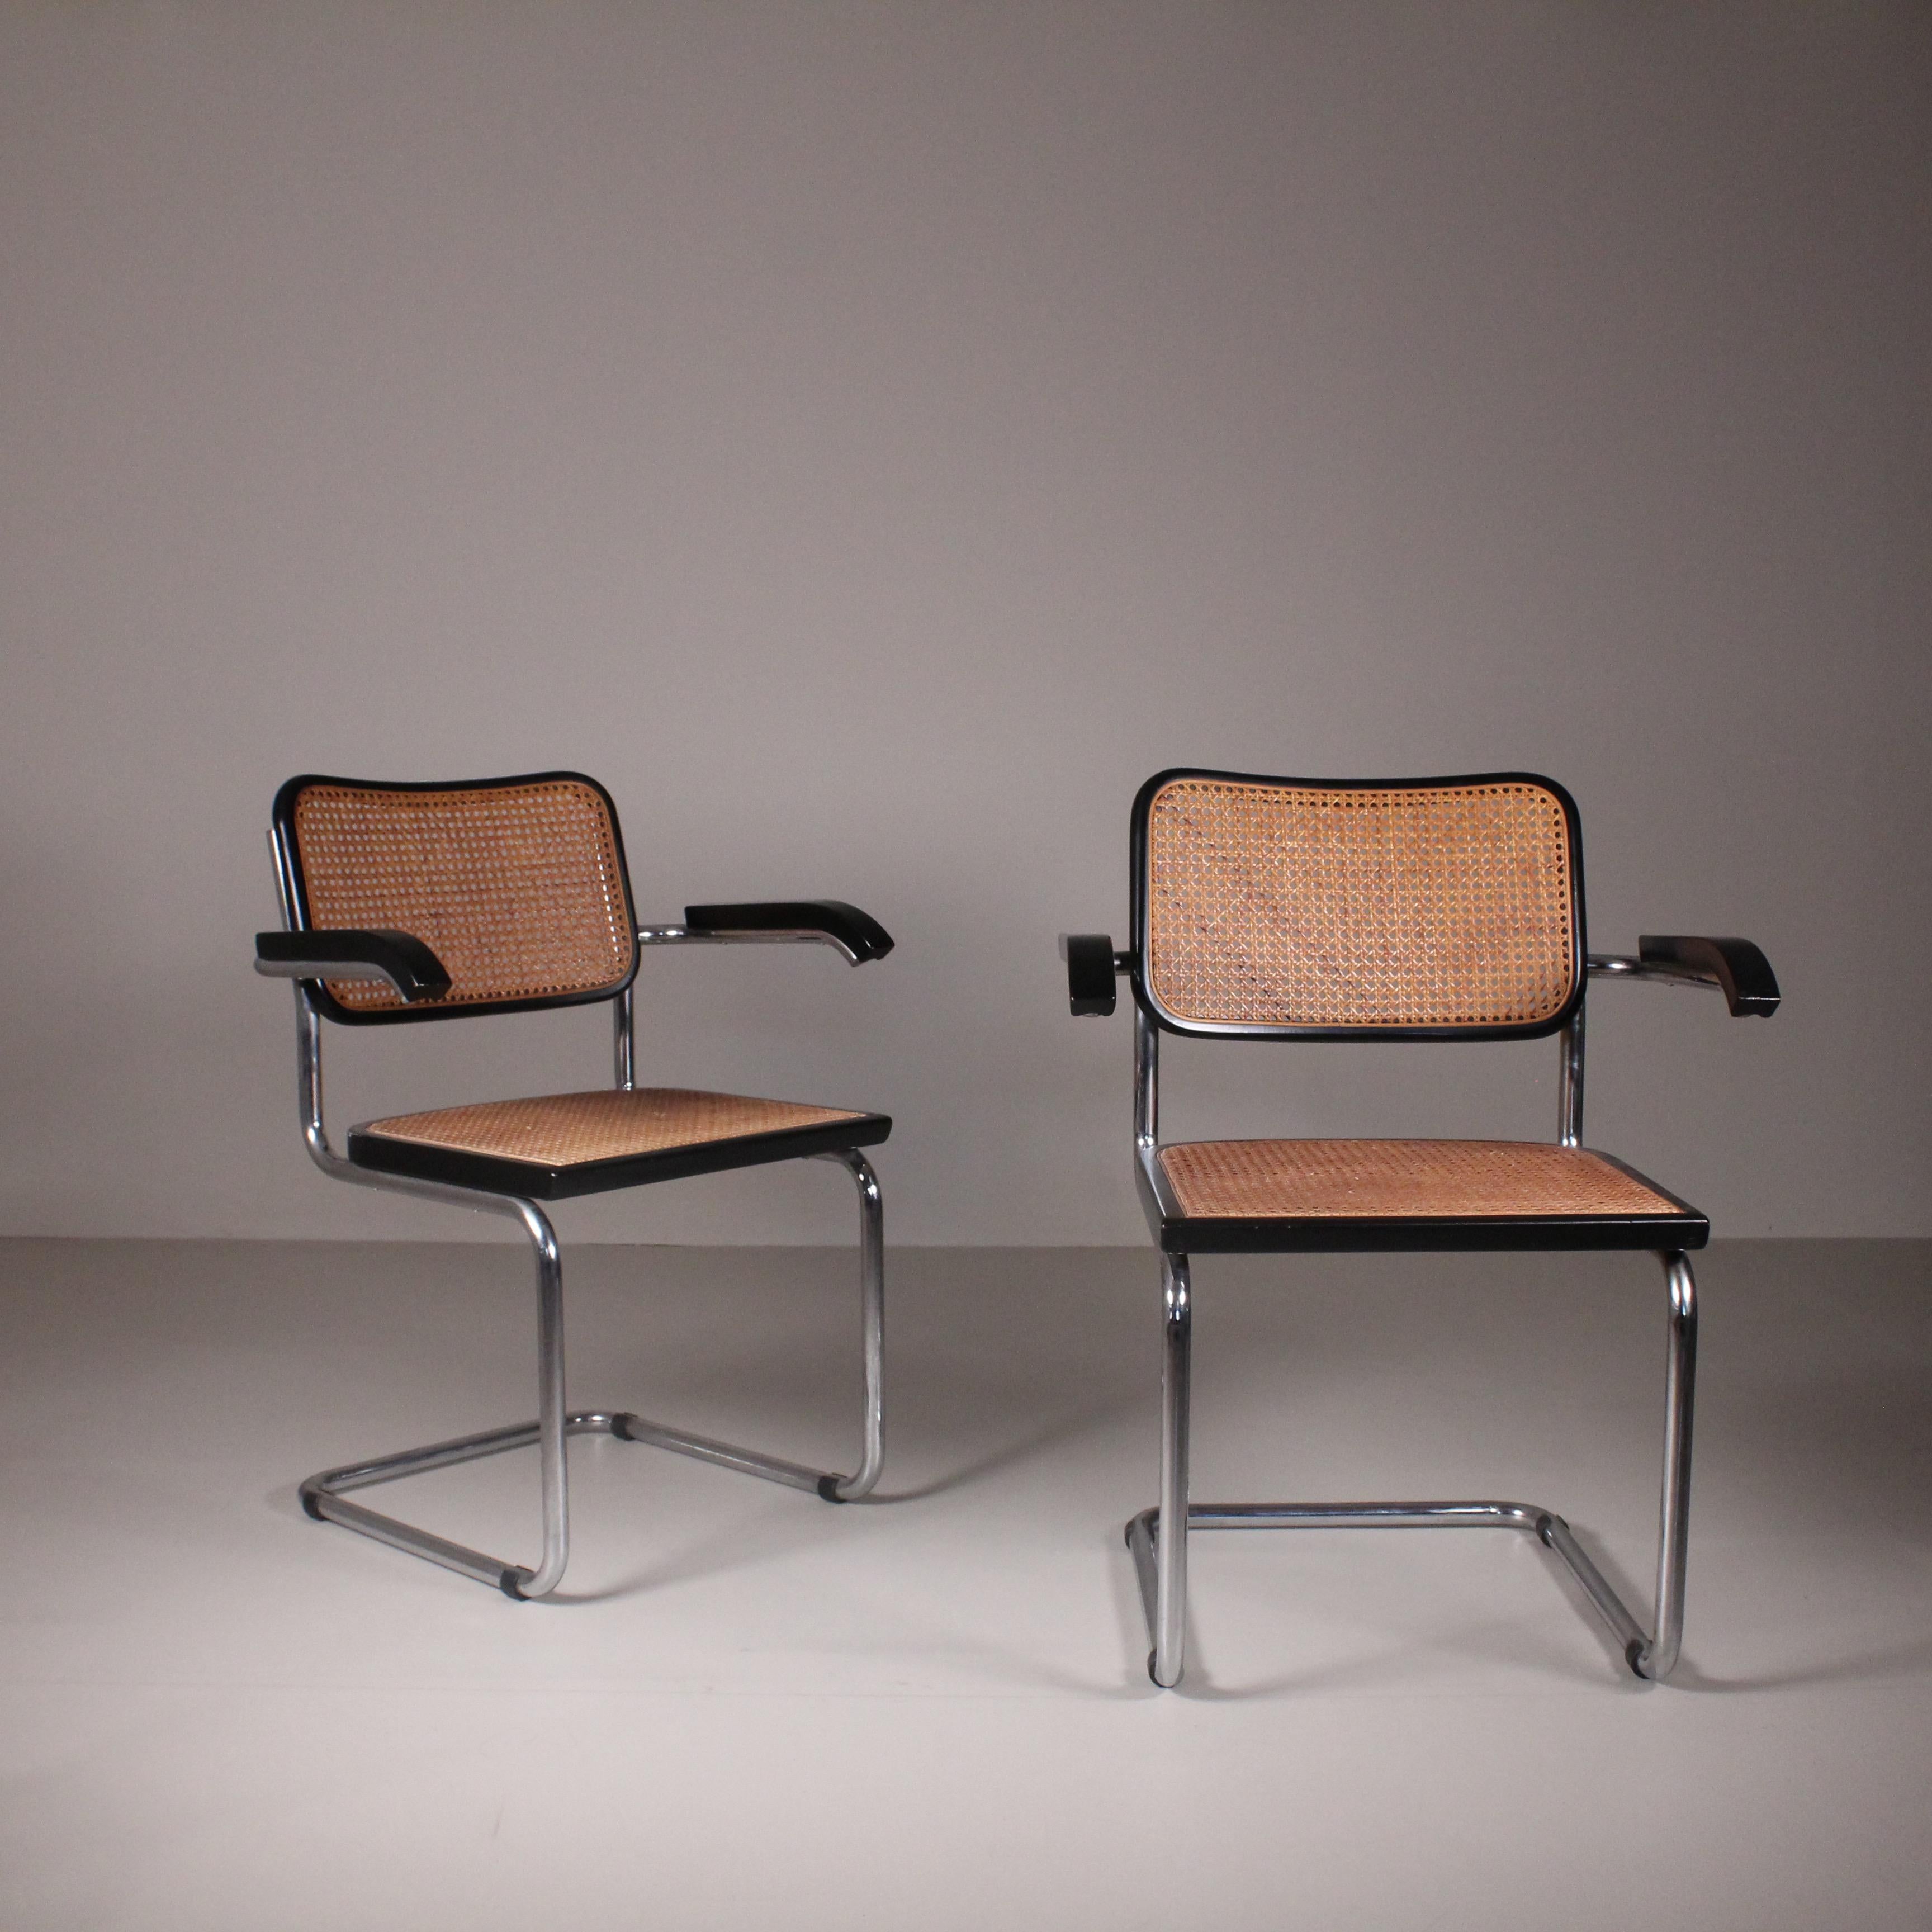 Set of 2 Chairs Cesca, Marcel Breuer, Gavina, 1970. The Set of 2 Cesca Chairs, designed by Marcel Breuer in 1970 for Gavina, epitomizes modernist elegance and enduring style. Crafted with a visionary approach, Breuer seamlessly blends tubular steel